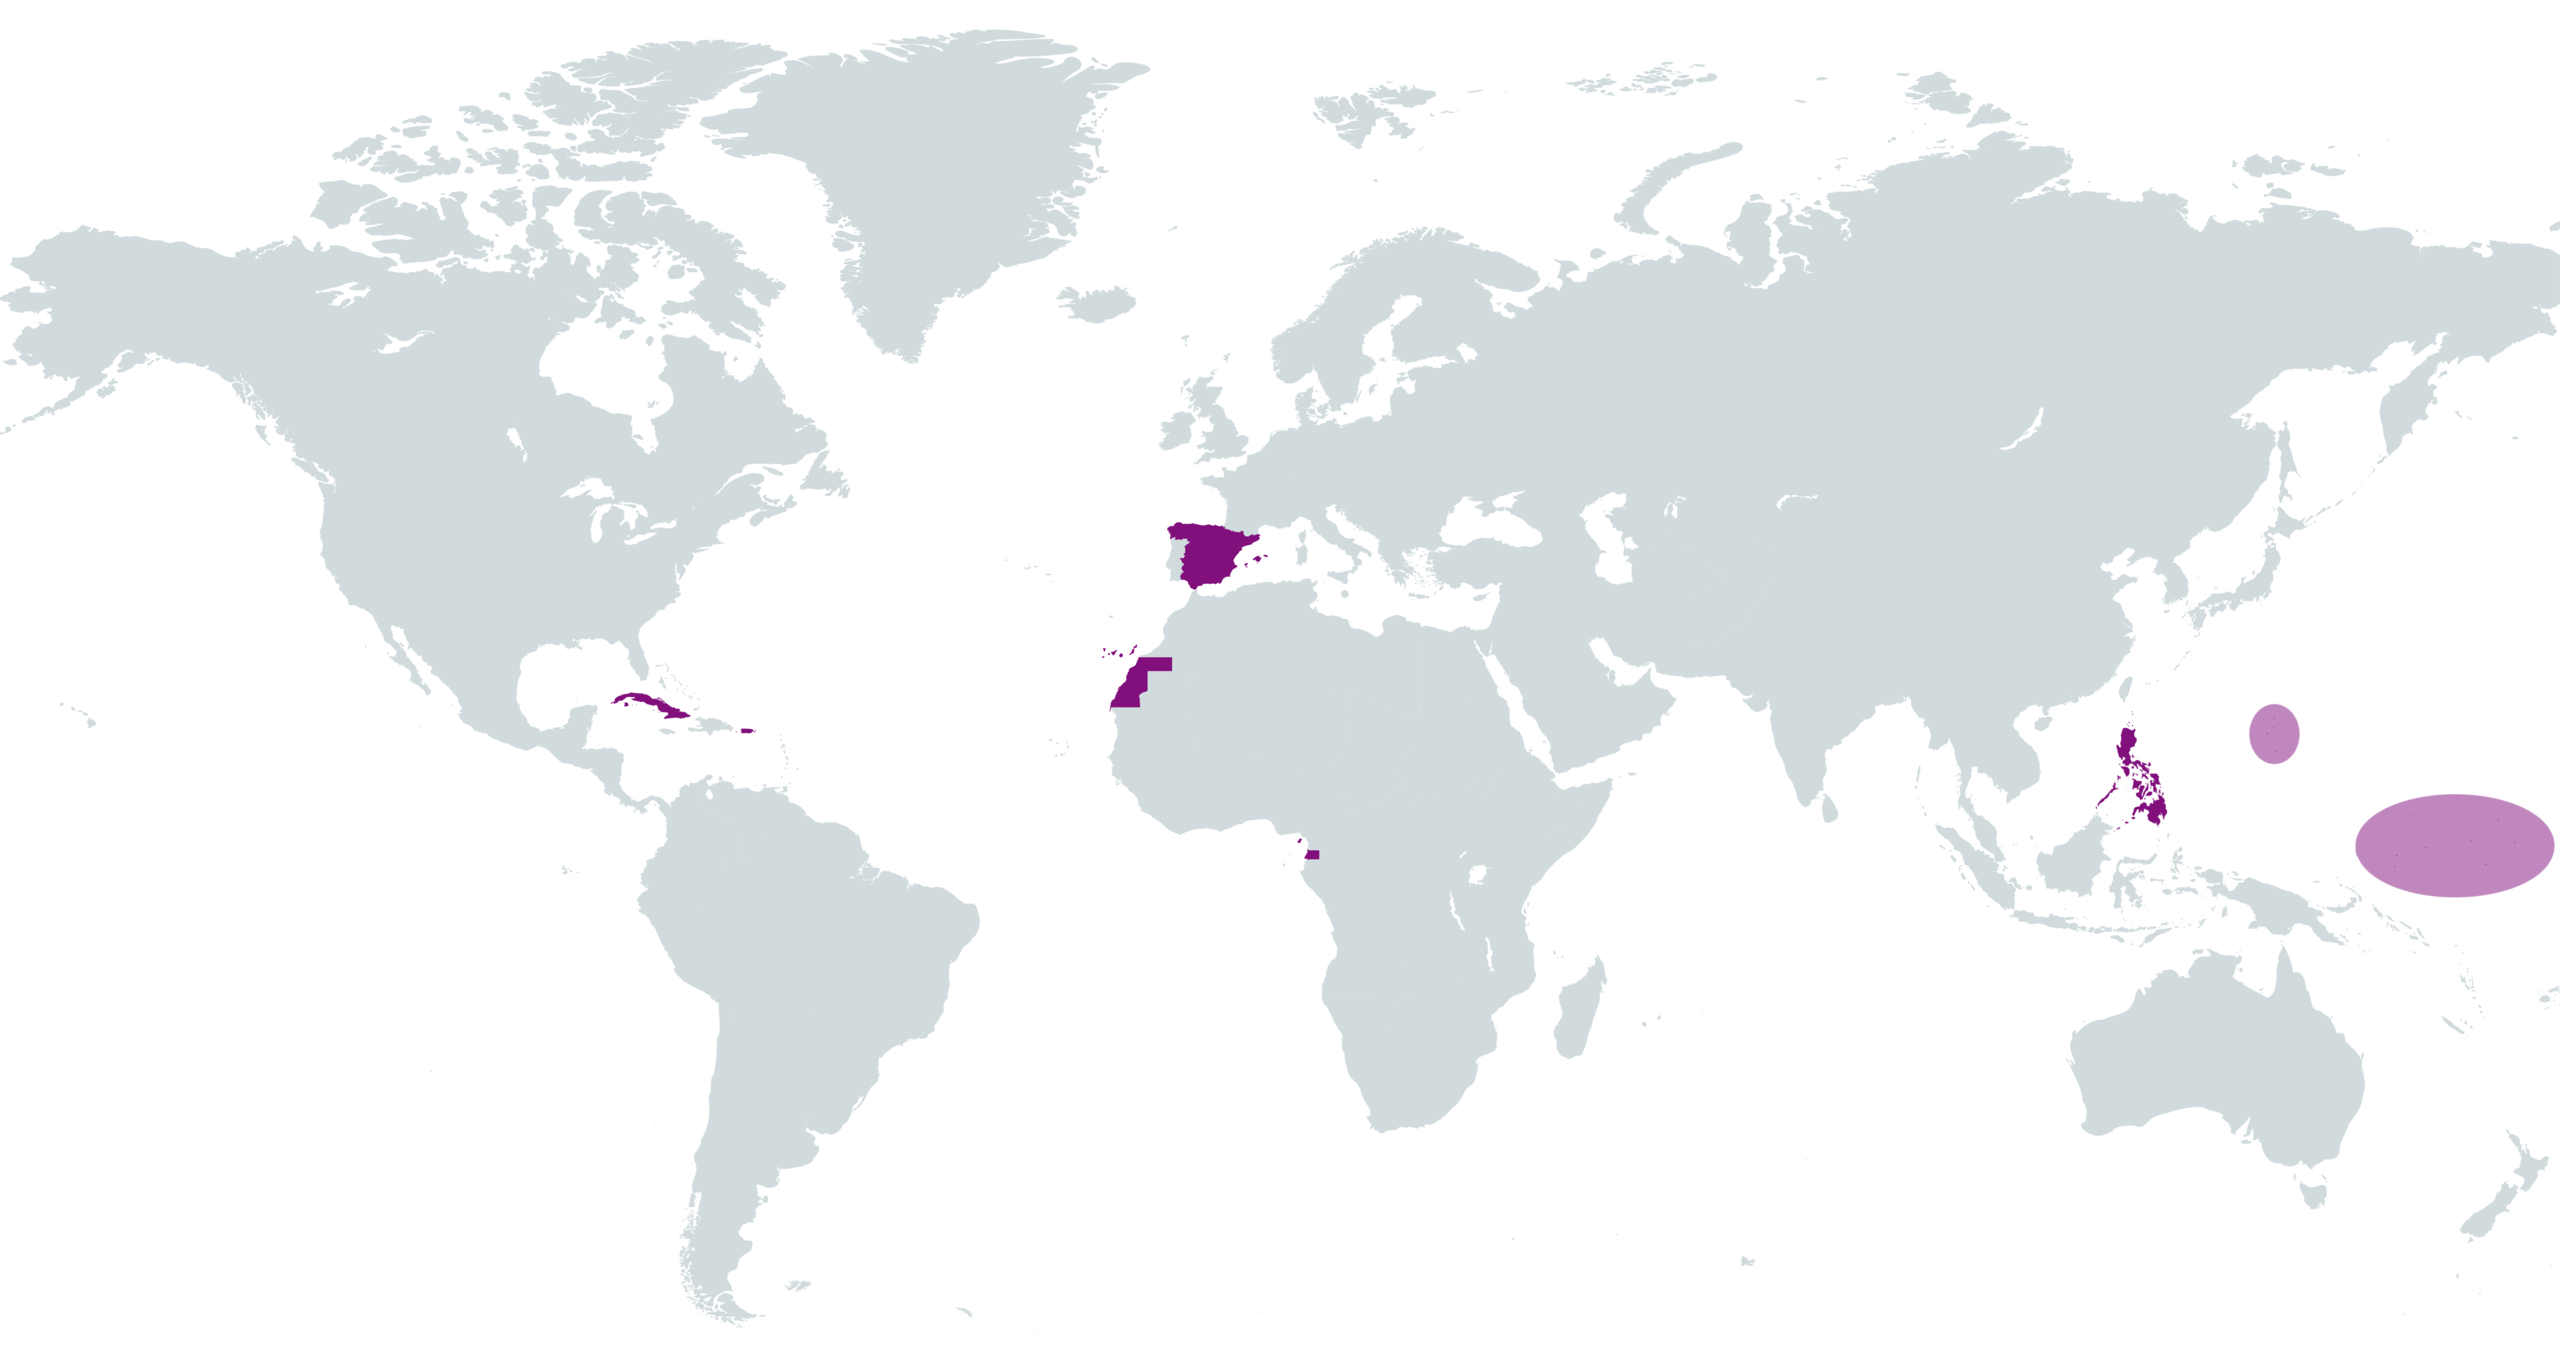 File:Spanish Empire at its greatest Extent 1783.png - Wikimedia